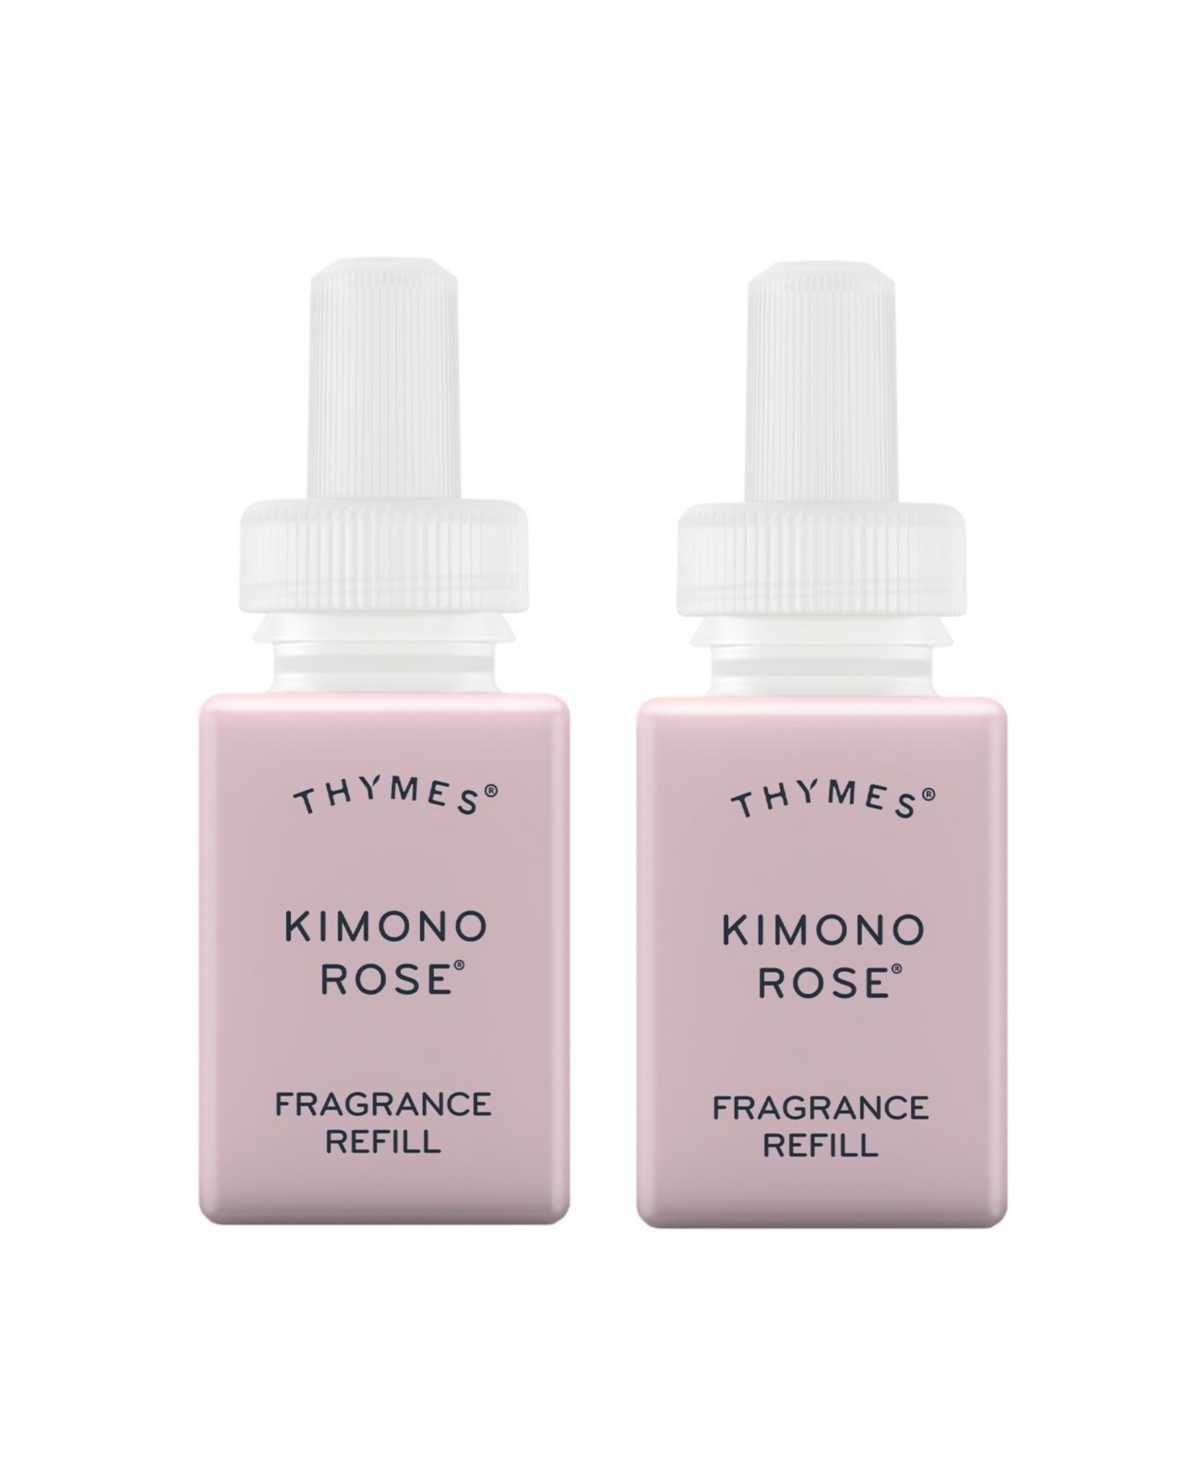 and Thymes - Kimono Rose - Fragrance for Smart Home Air Diffusers - Room Freshener - Aromatherapy Scents for Bedrooms & Living Rooms - 2 Pack